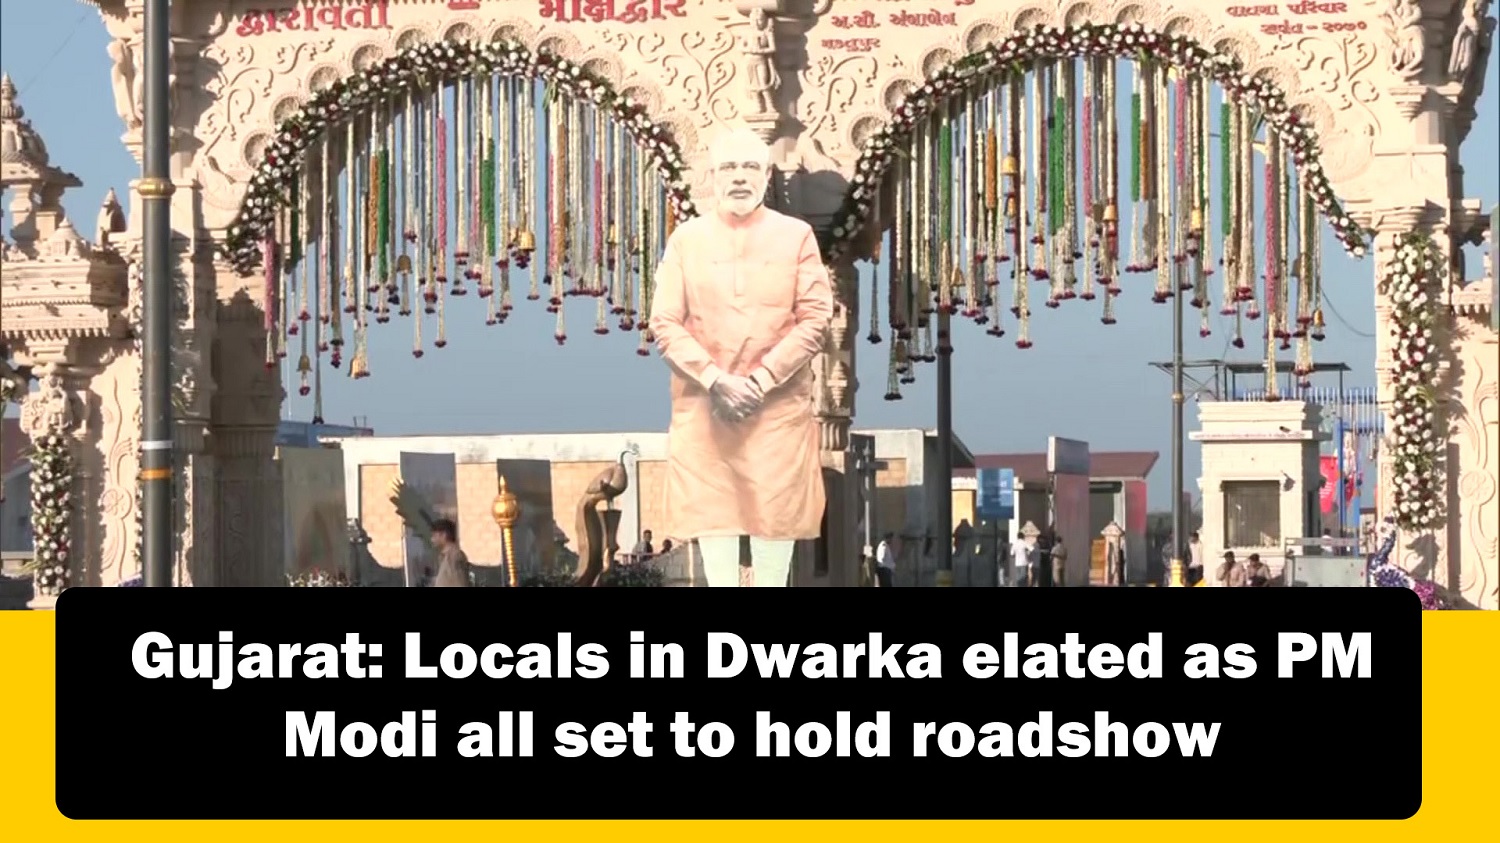 Gujarat` Locals in Dwarka elated as Prime Minister Narendra Modi all set to hold roadshow